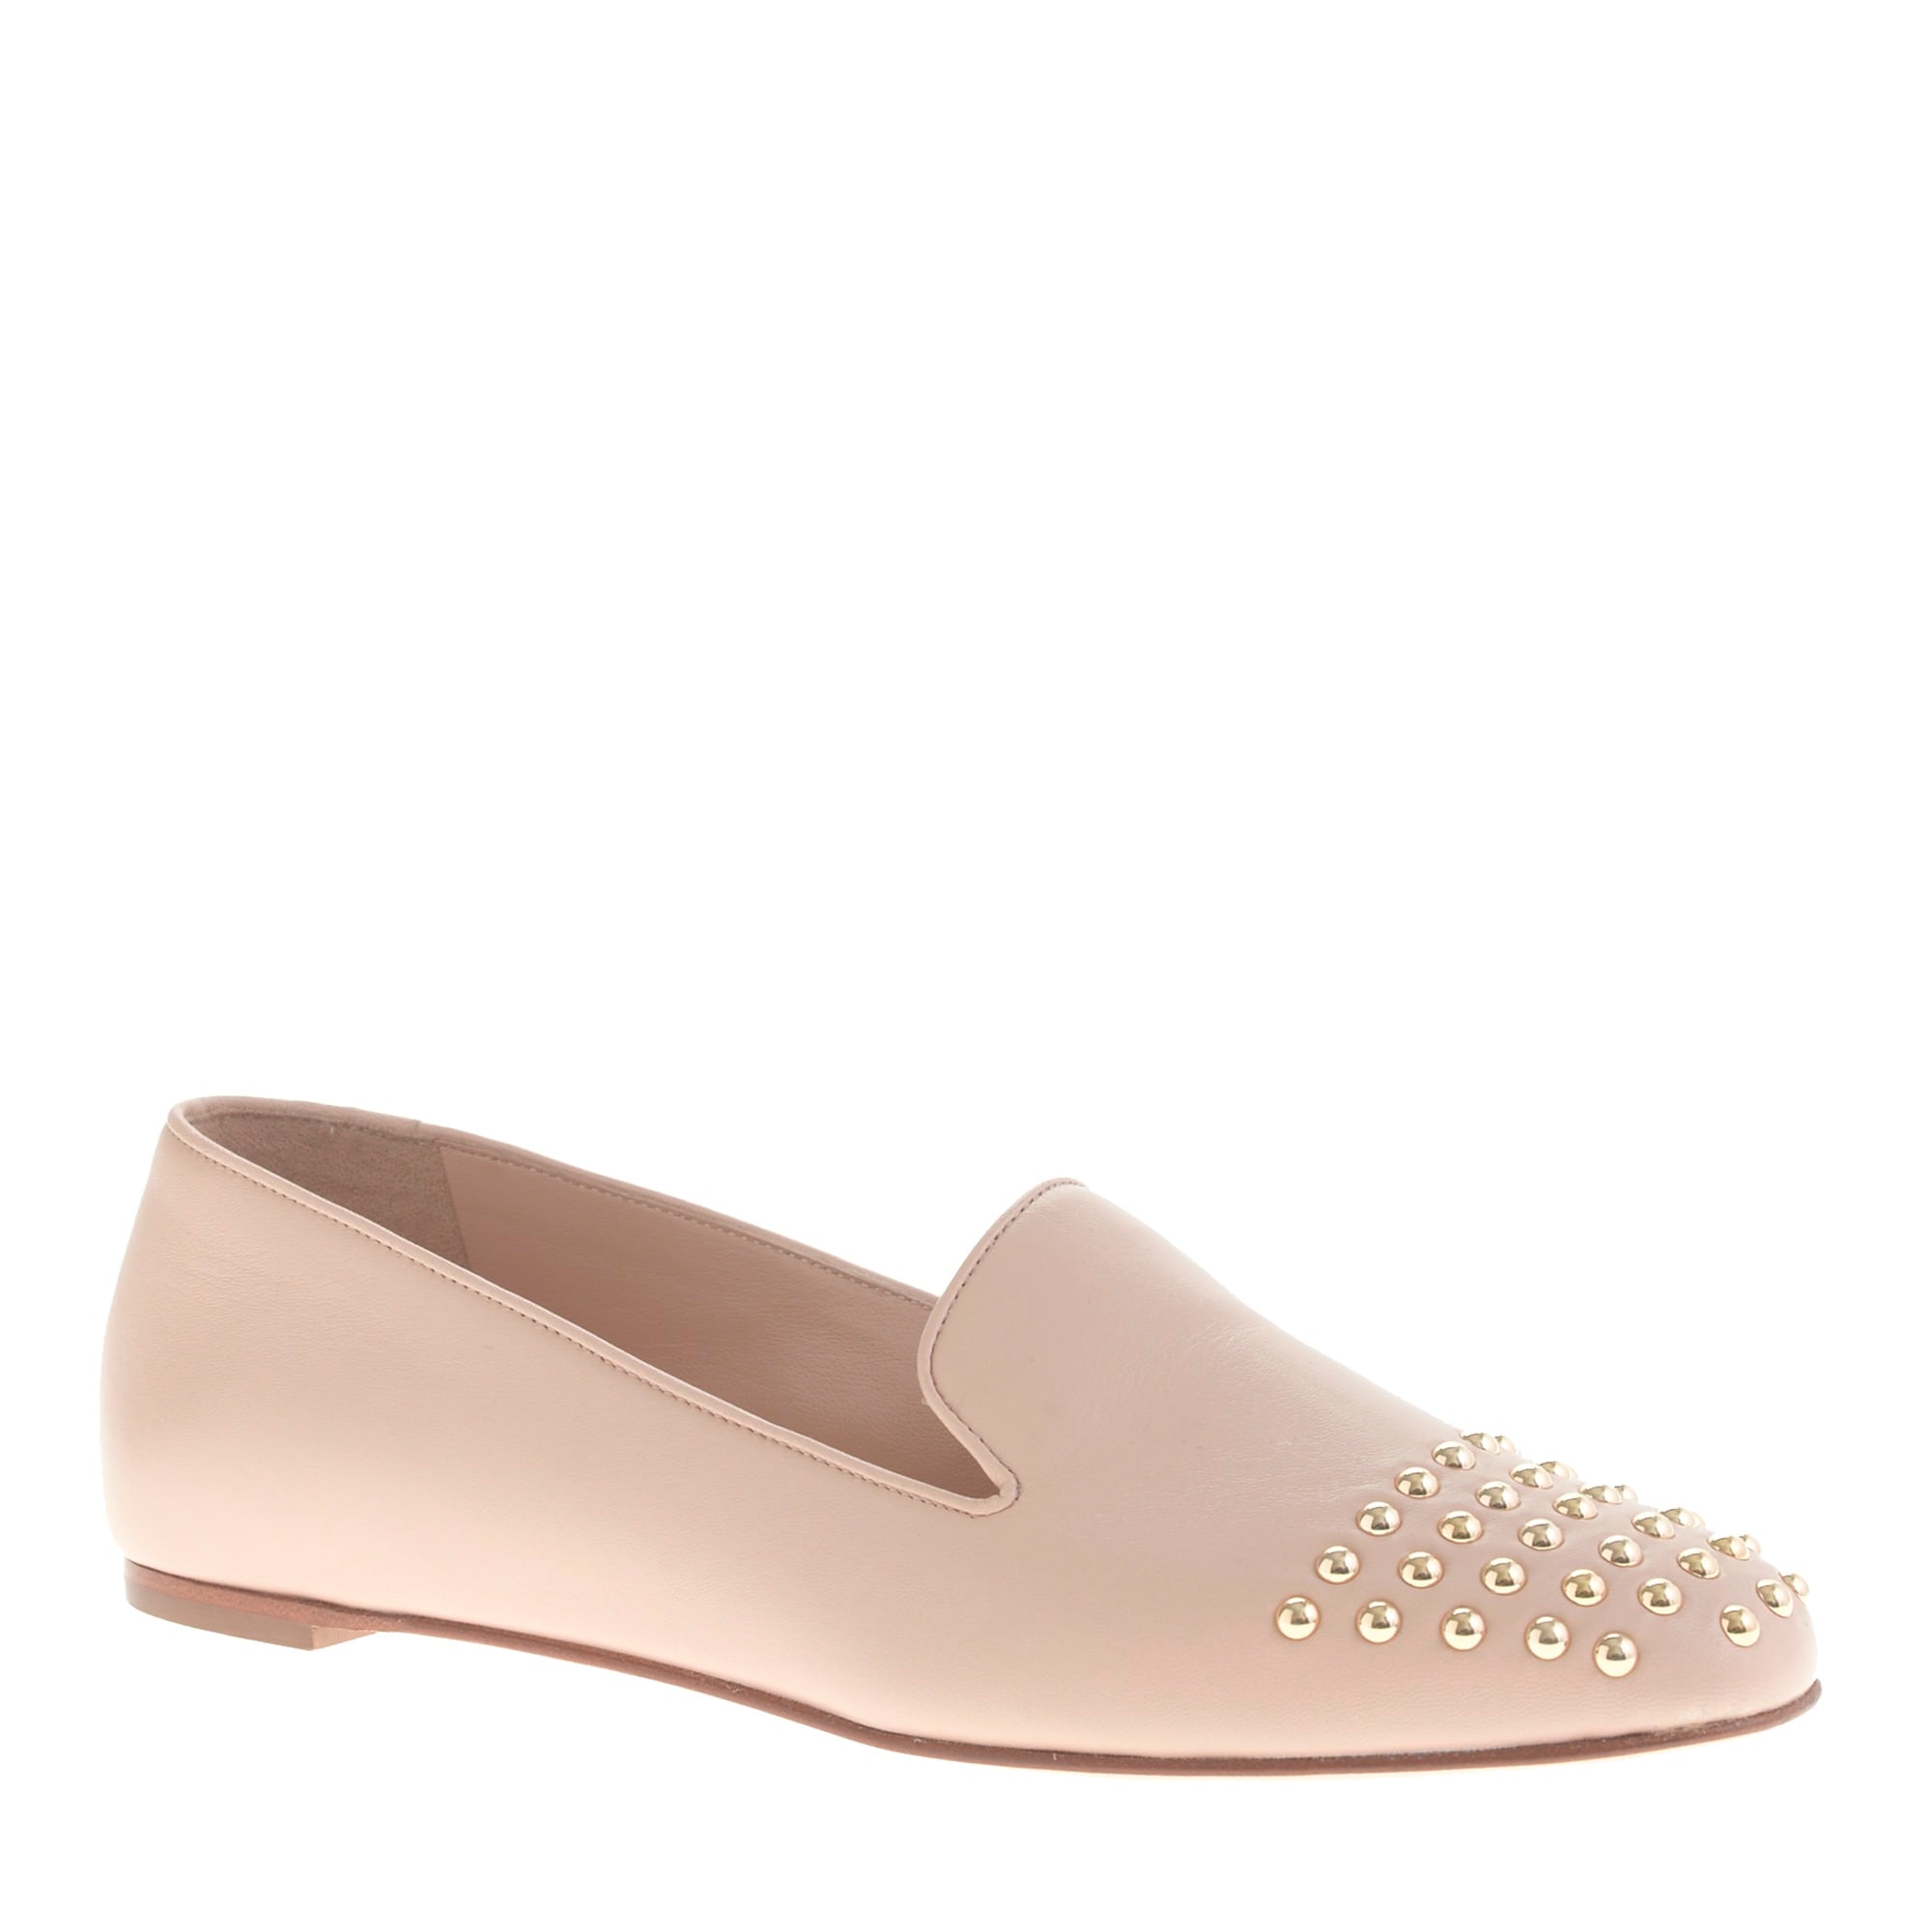 Darby studded cap toe loafers : Women loafers & oxfords | J.Crew